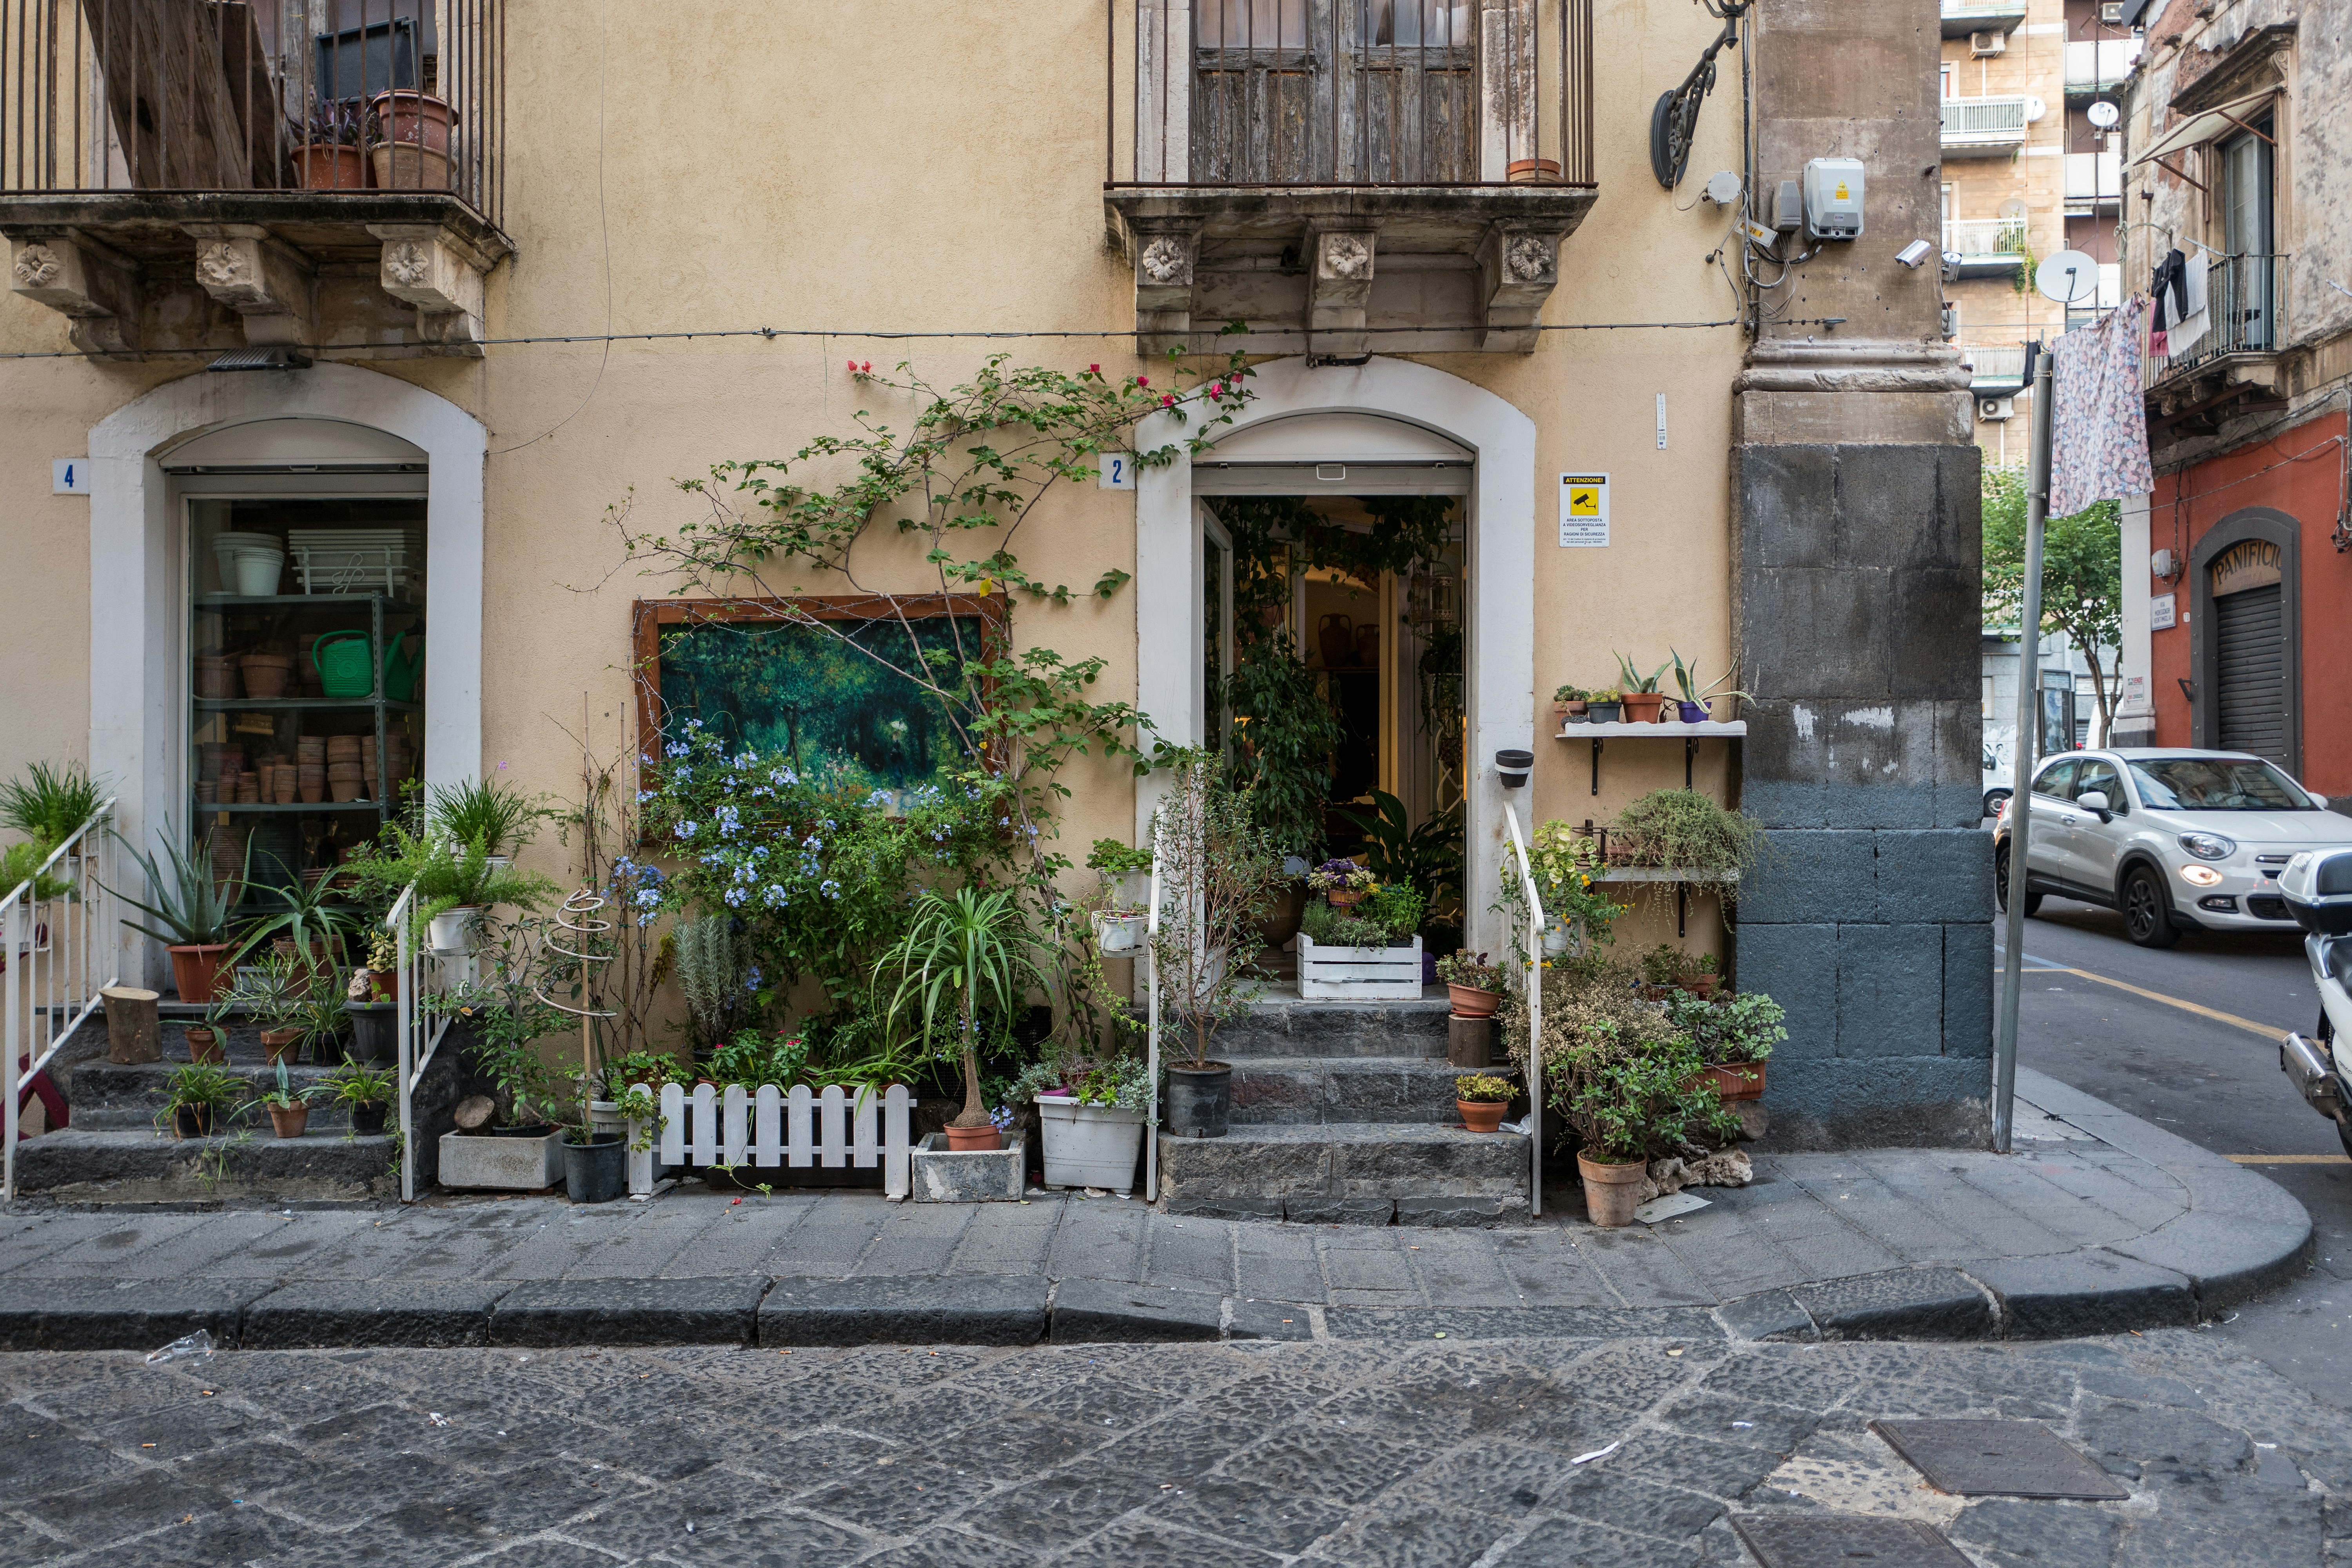 We were on our way to have lunch and suddenly we found a very authentic and cozy flower shop in Catania (Italy).